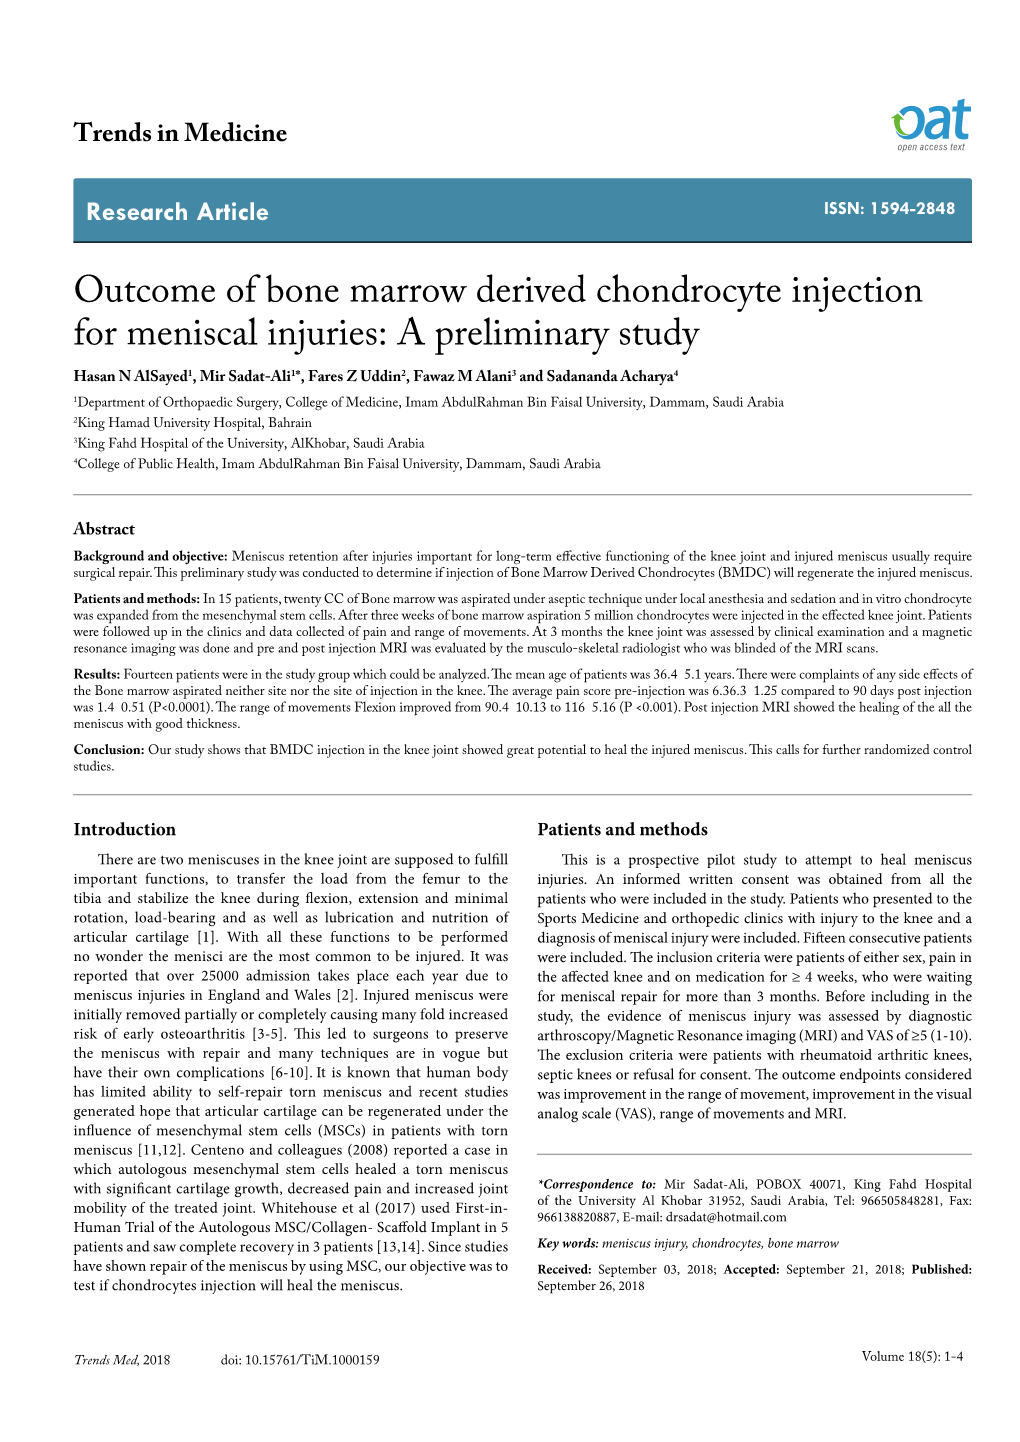 Outcome of Bone Marrow Derived Chondrocyte Injection for Meniscal